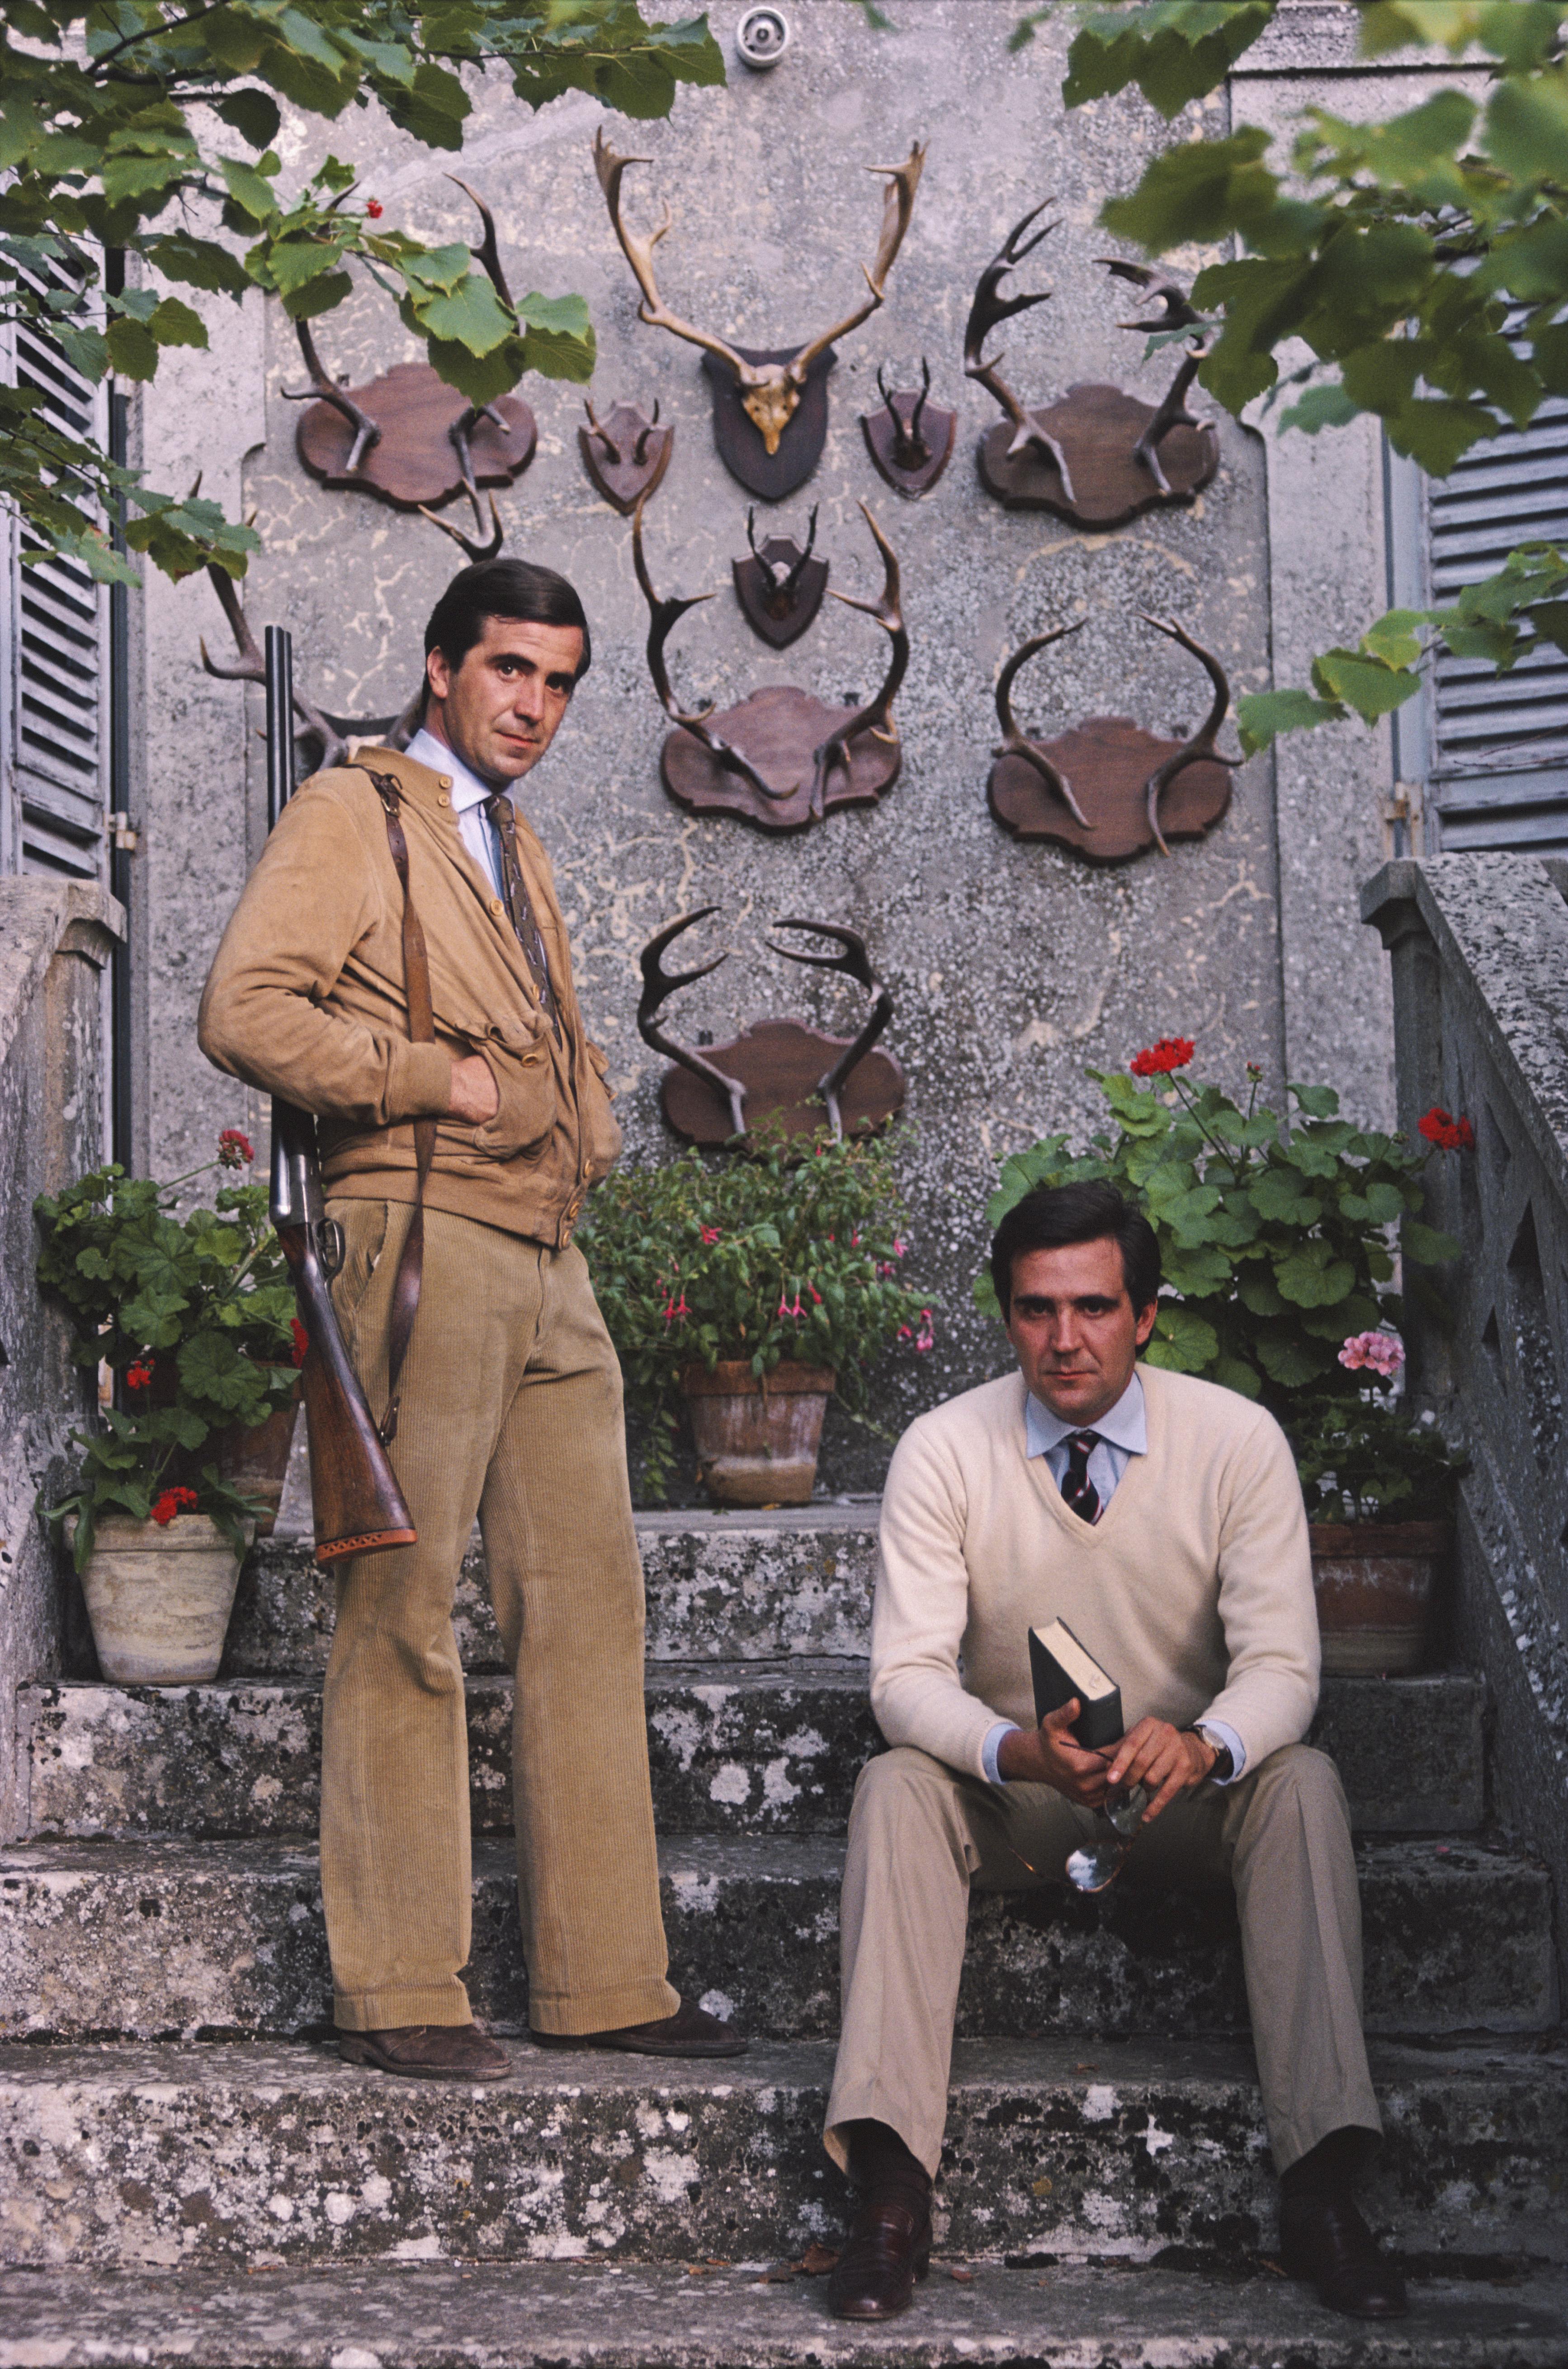 'Gioacchino And Gian Nicola Fiilippi' 1982 Slim Aarons Limited Estate Edition Print 

Gioacchino and Gian Nicola Fiilippi pose before a display of antlers mounted on the wall behind them in San Marino, in September 1982. One carries a rifle over his